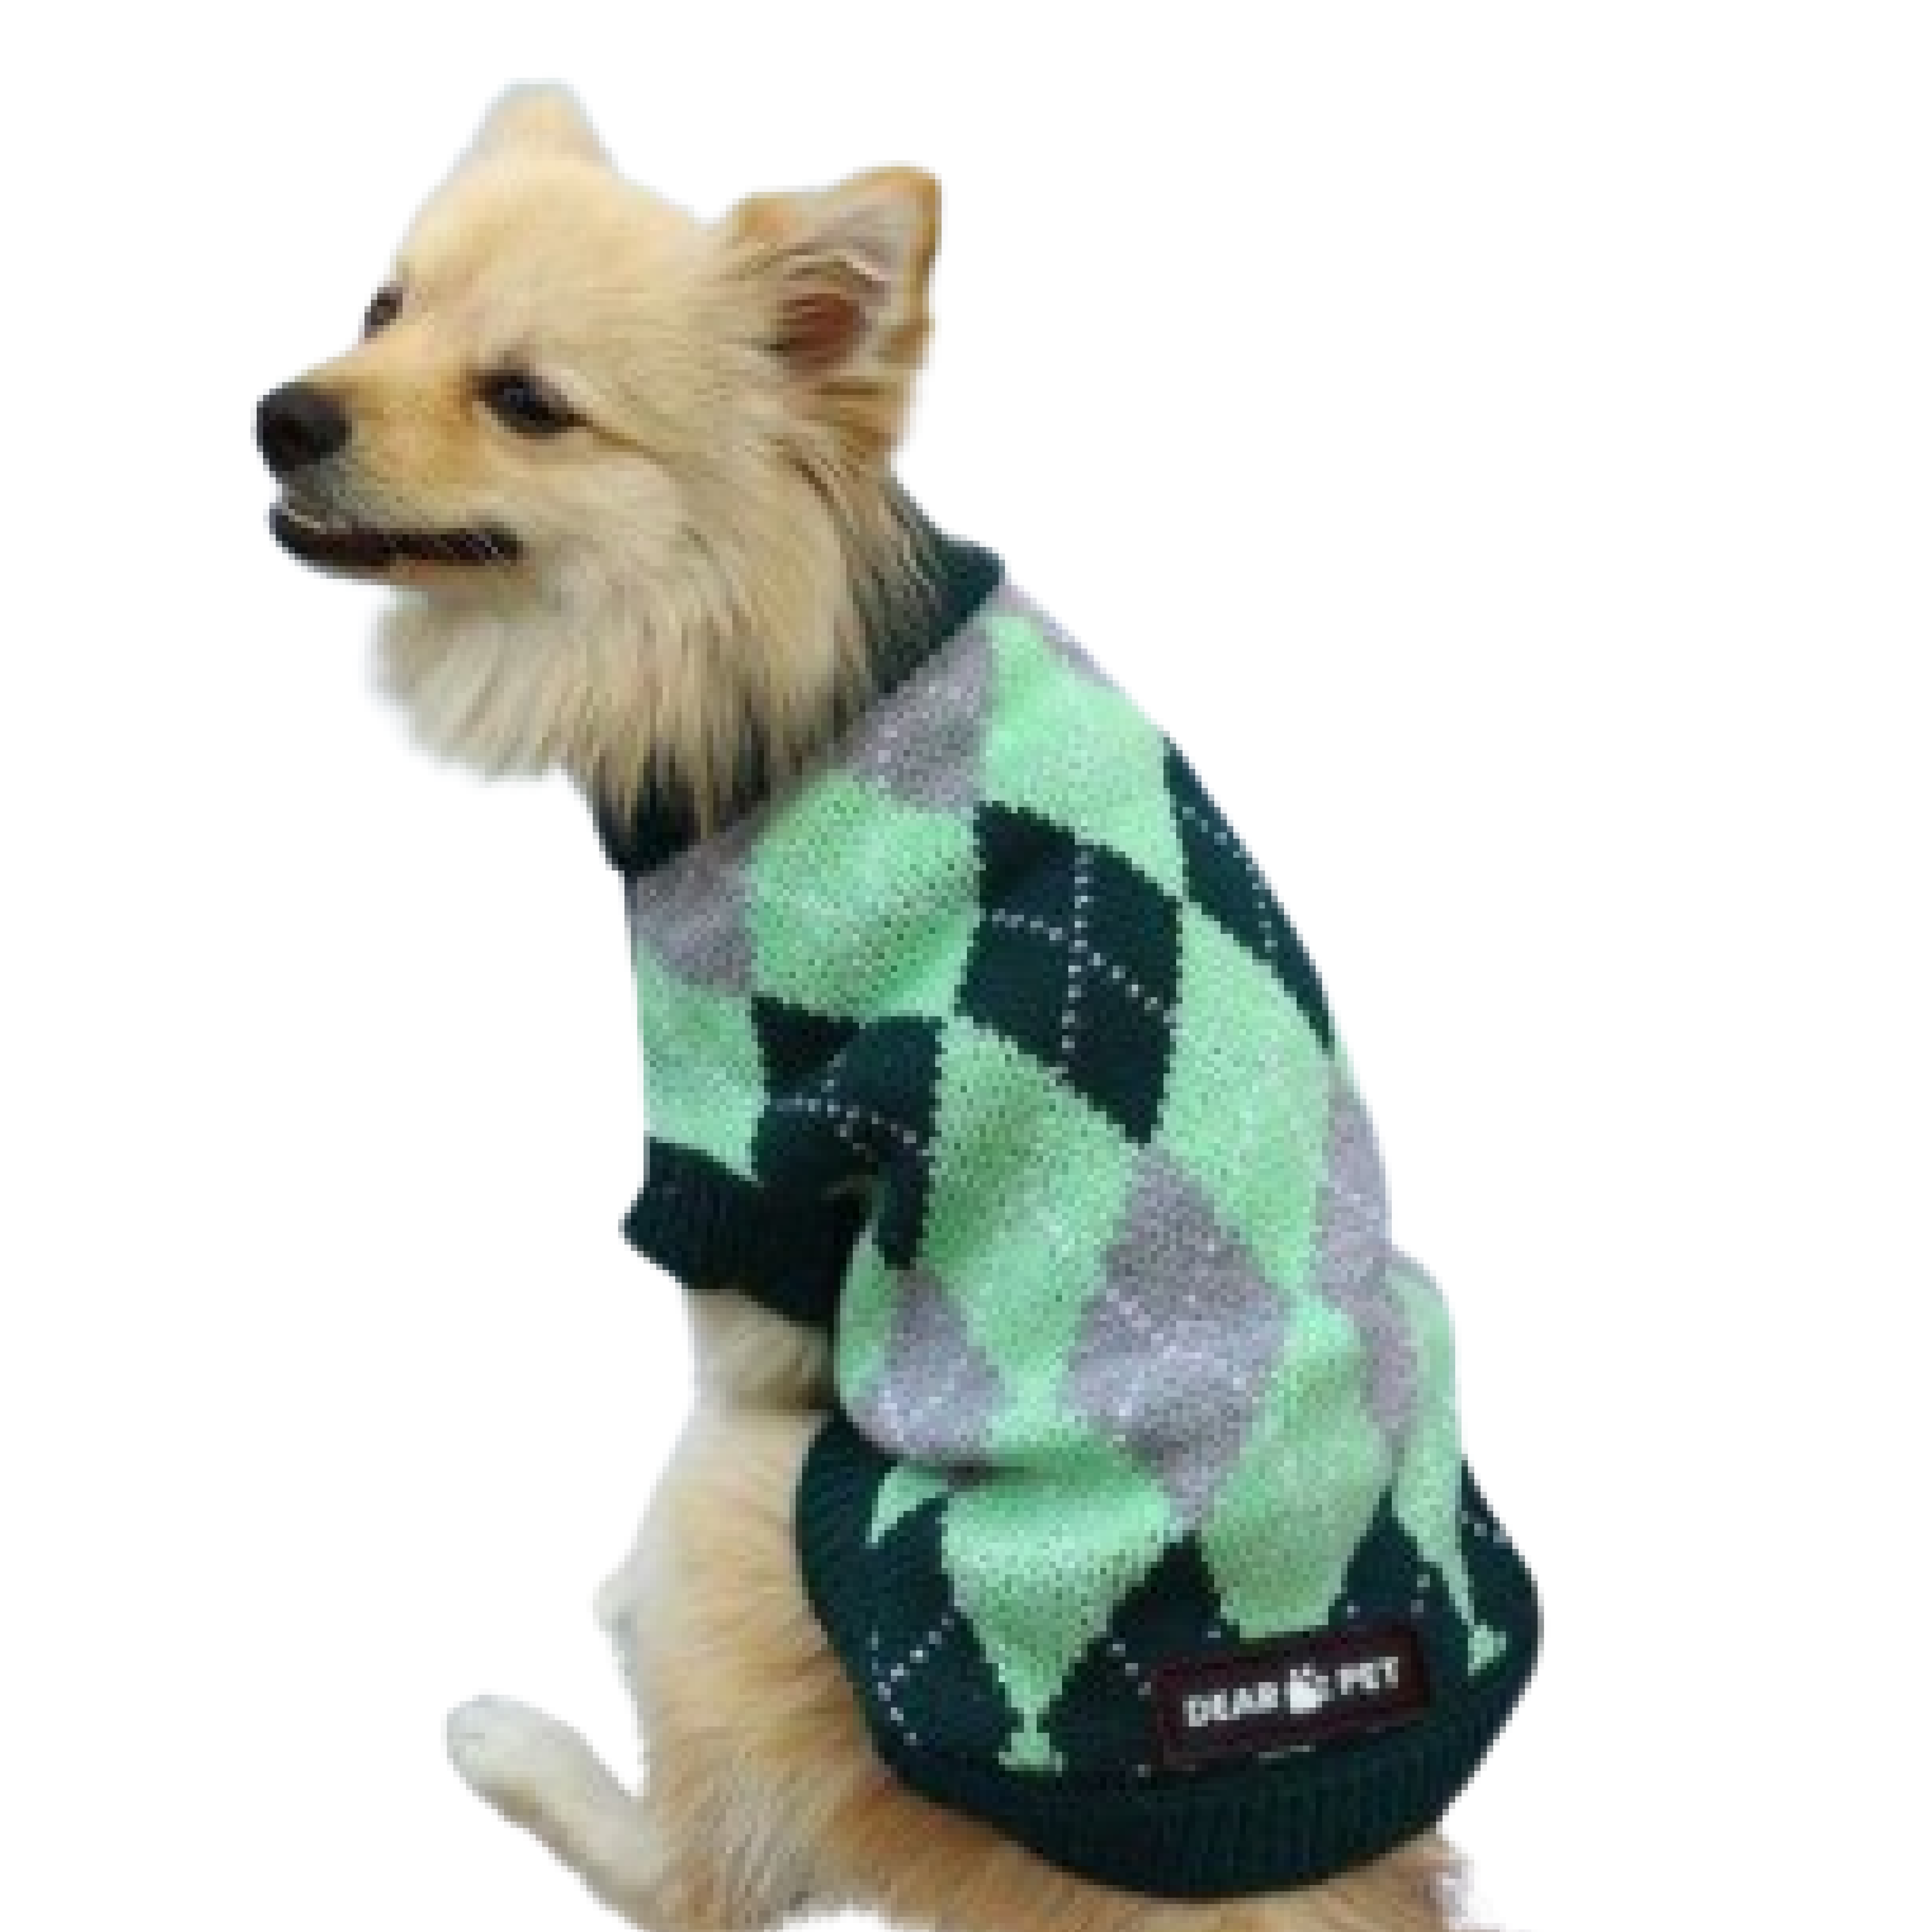 DearPet Dog Sweaters in Vibarant colours